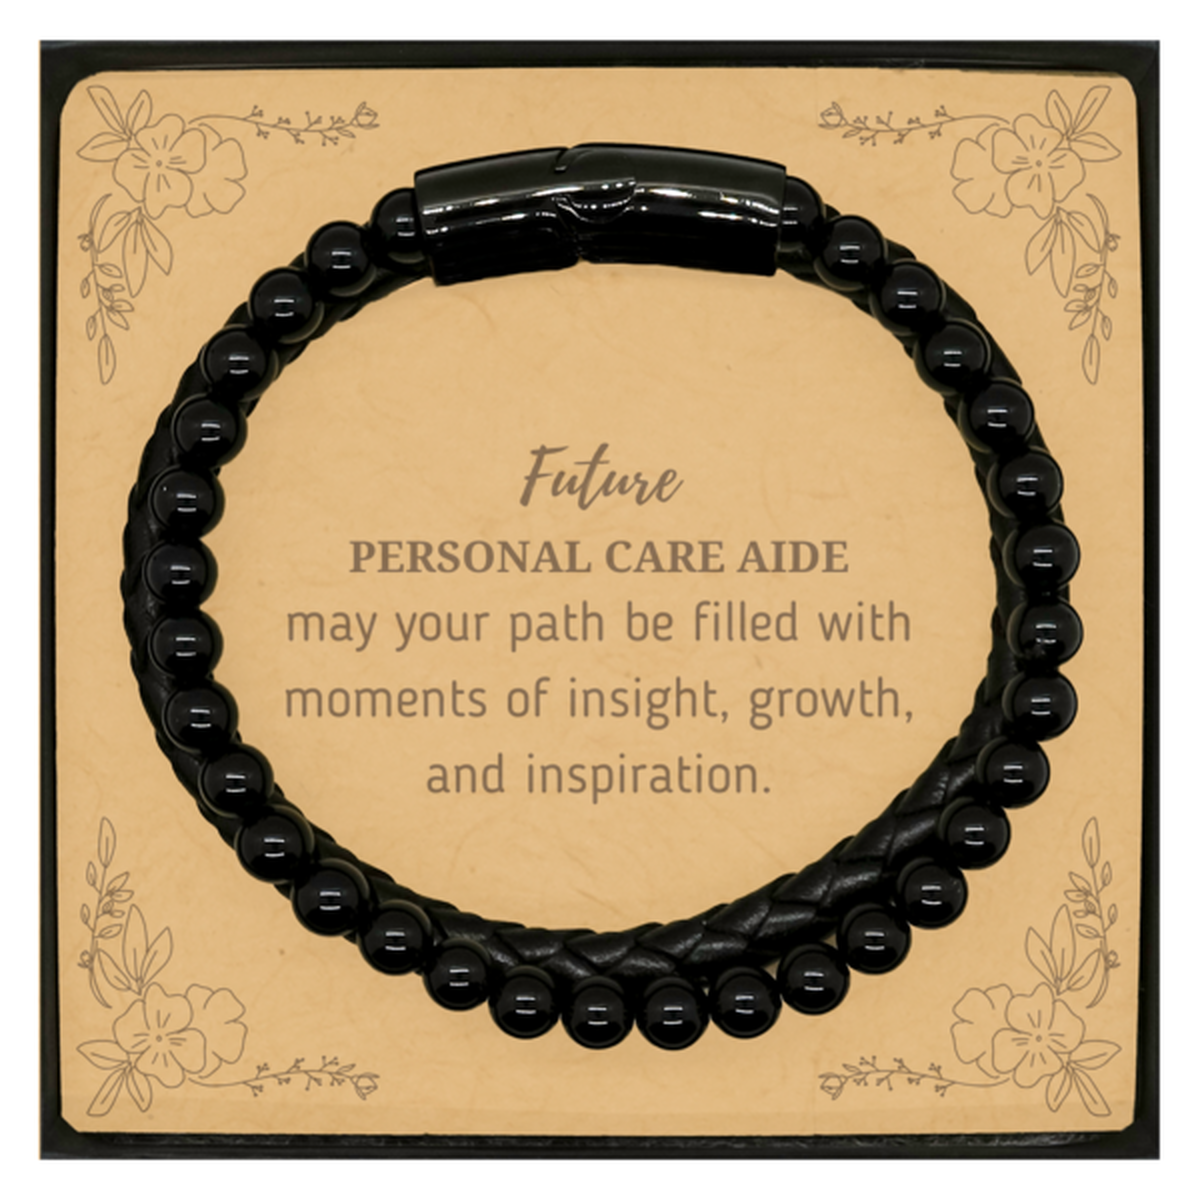 Future Personal Care Aide Gifts, May your path be filled with moments of insight, Graduation Gifts for New Personal Care Aide, Christmas Unique Stone Leather Bracelets For Men, Women, Friends